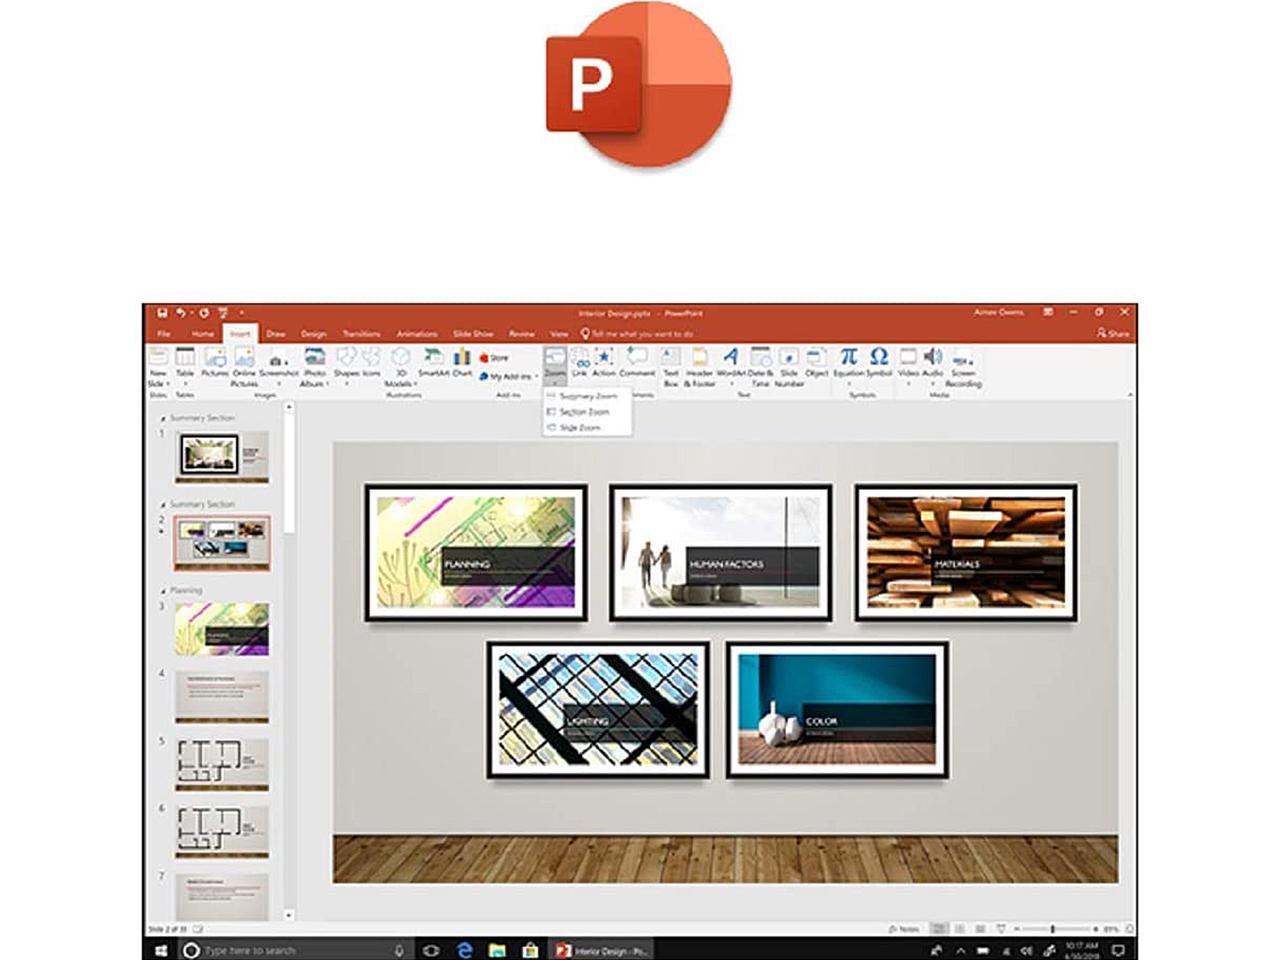 microsoft office one time download 2019